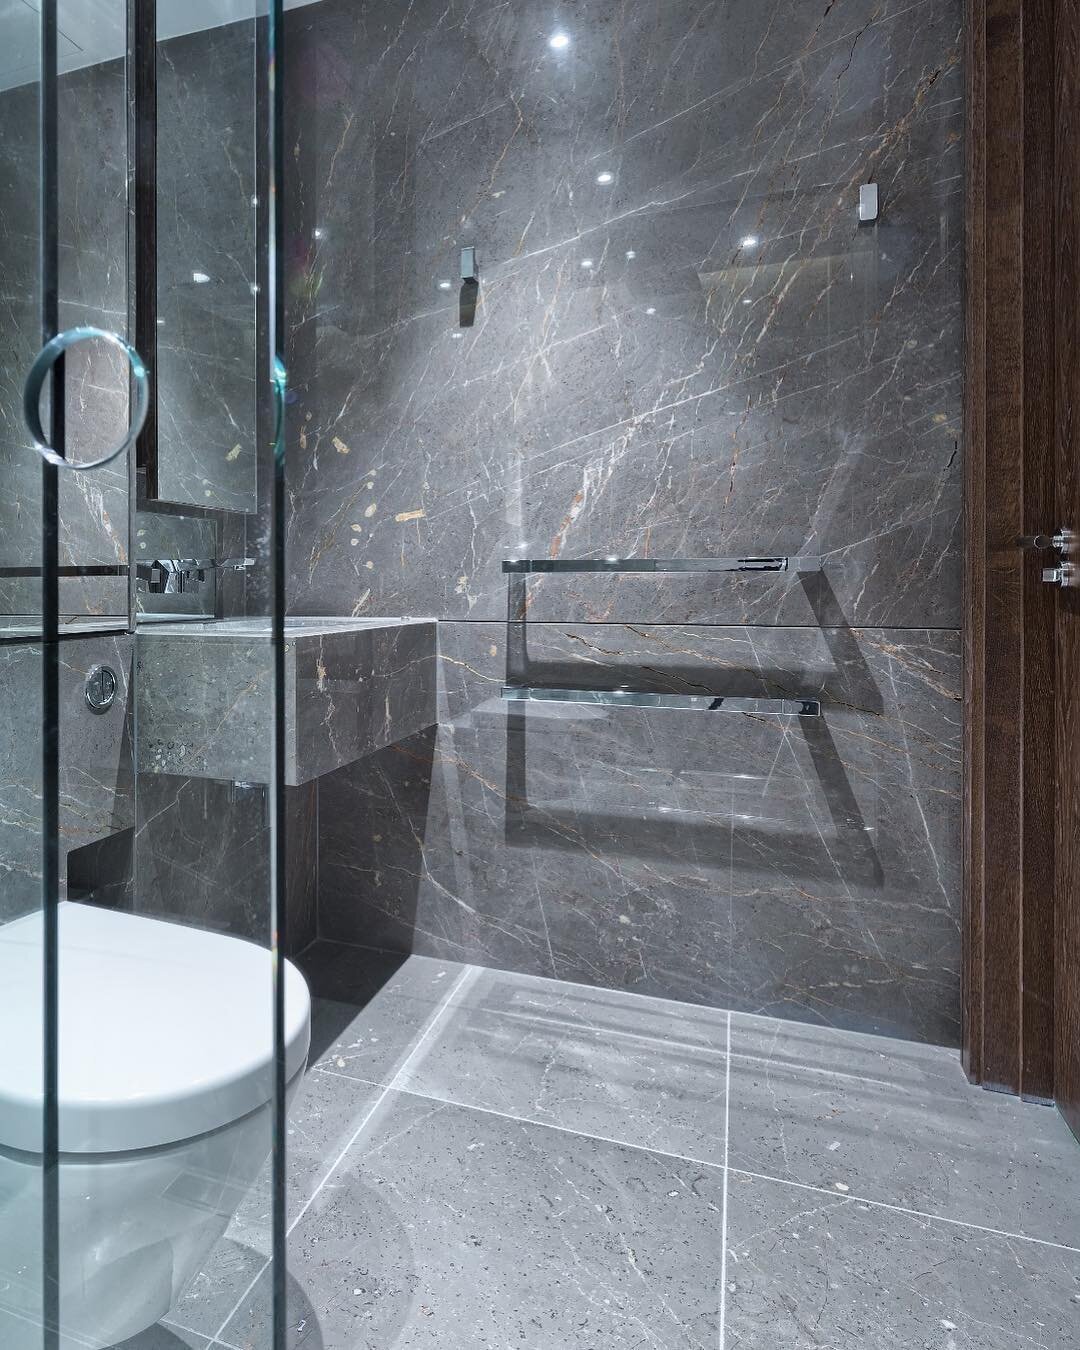 Grigio Argento from our Cervenill&euml; quarry in #Kosovo is the most versatile stone that ranges in colour and is impressively dense. Another of the Penthouse bathrooms at Chelsea Creek, a Luxurious development in London. &bull;
&bull;
&bull;
&bull;